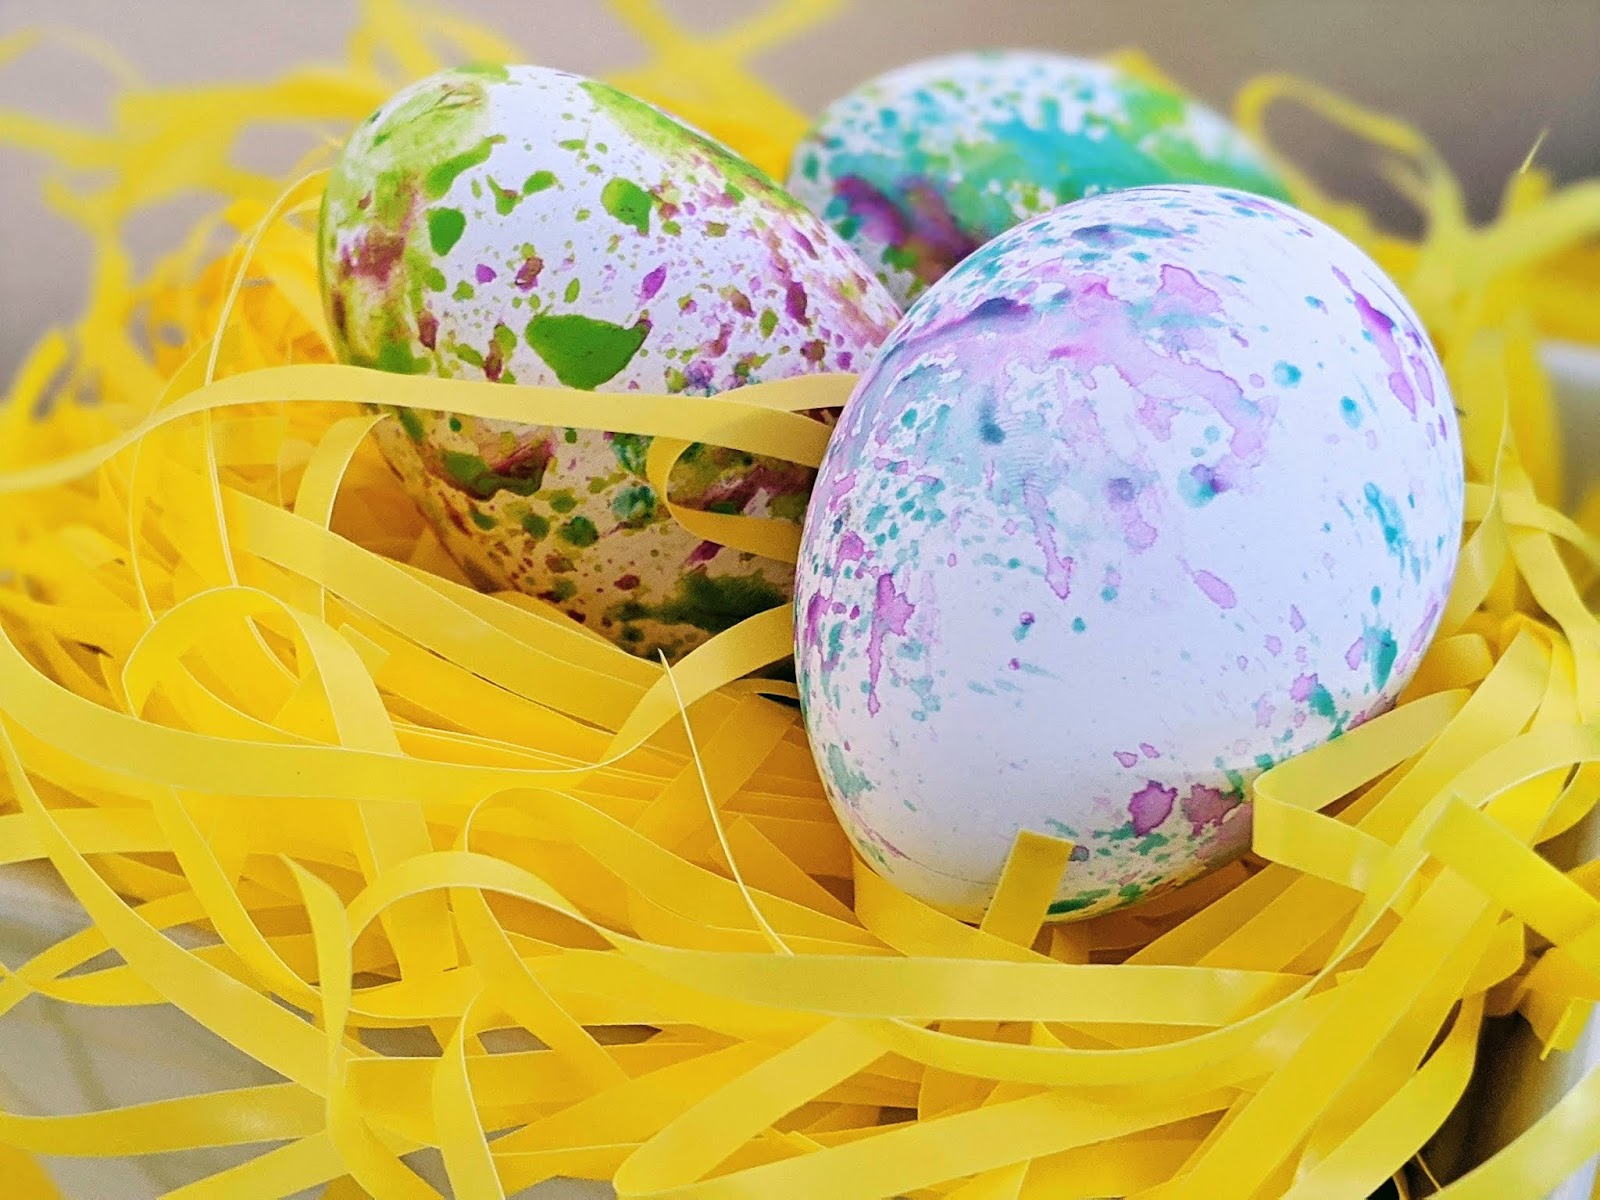 5 Cool Ways to Decorate Easter Eggs with the Kids